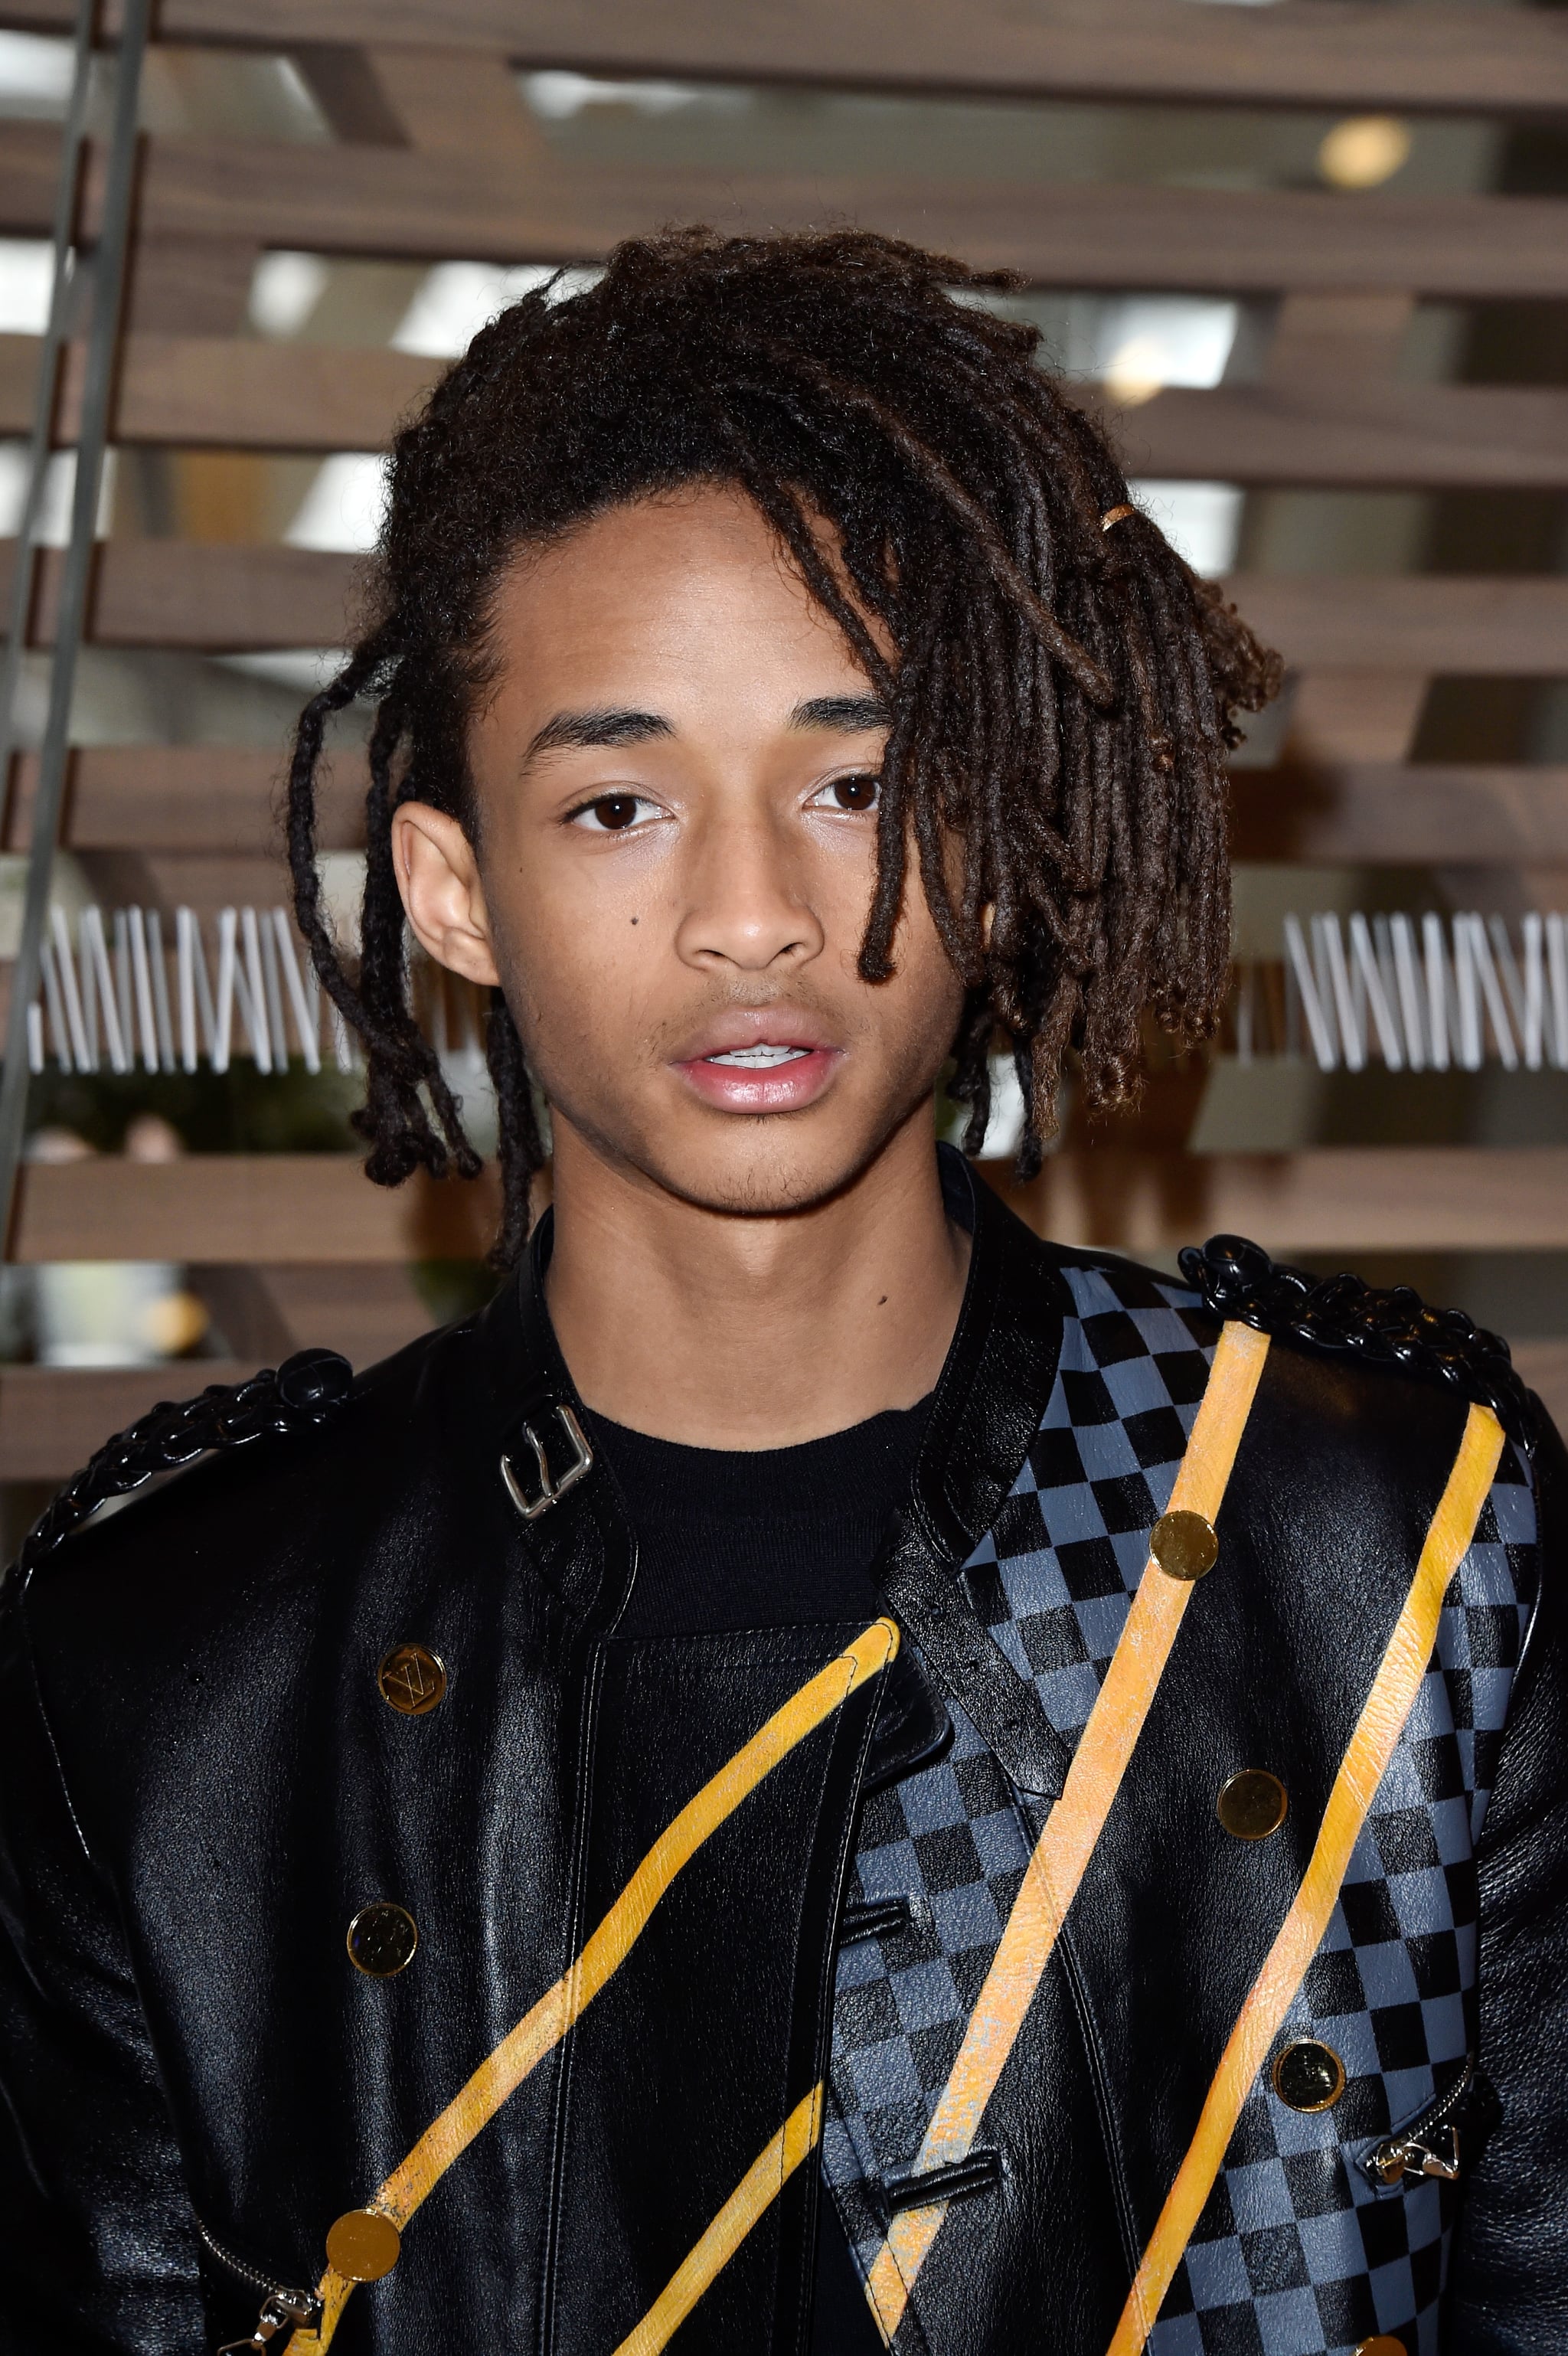 Jaden Smith mobbed by fans at Soho eatery | Page Six